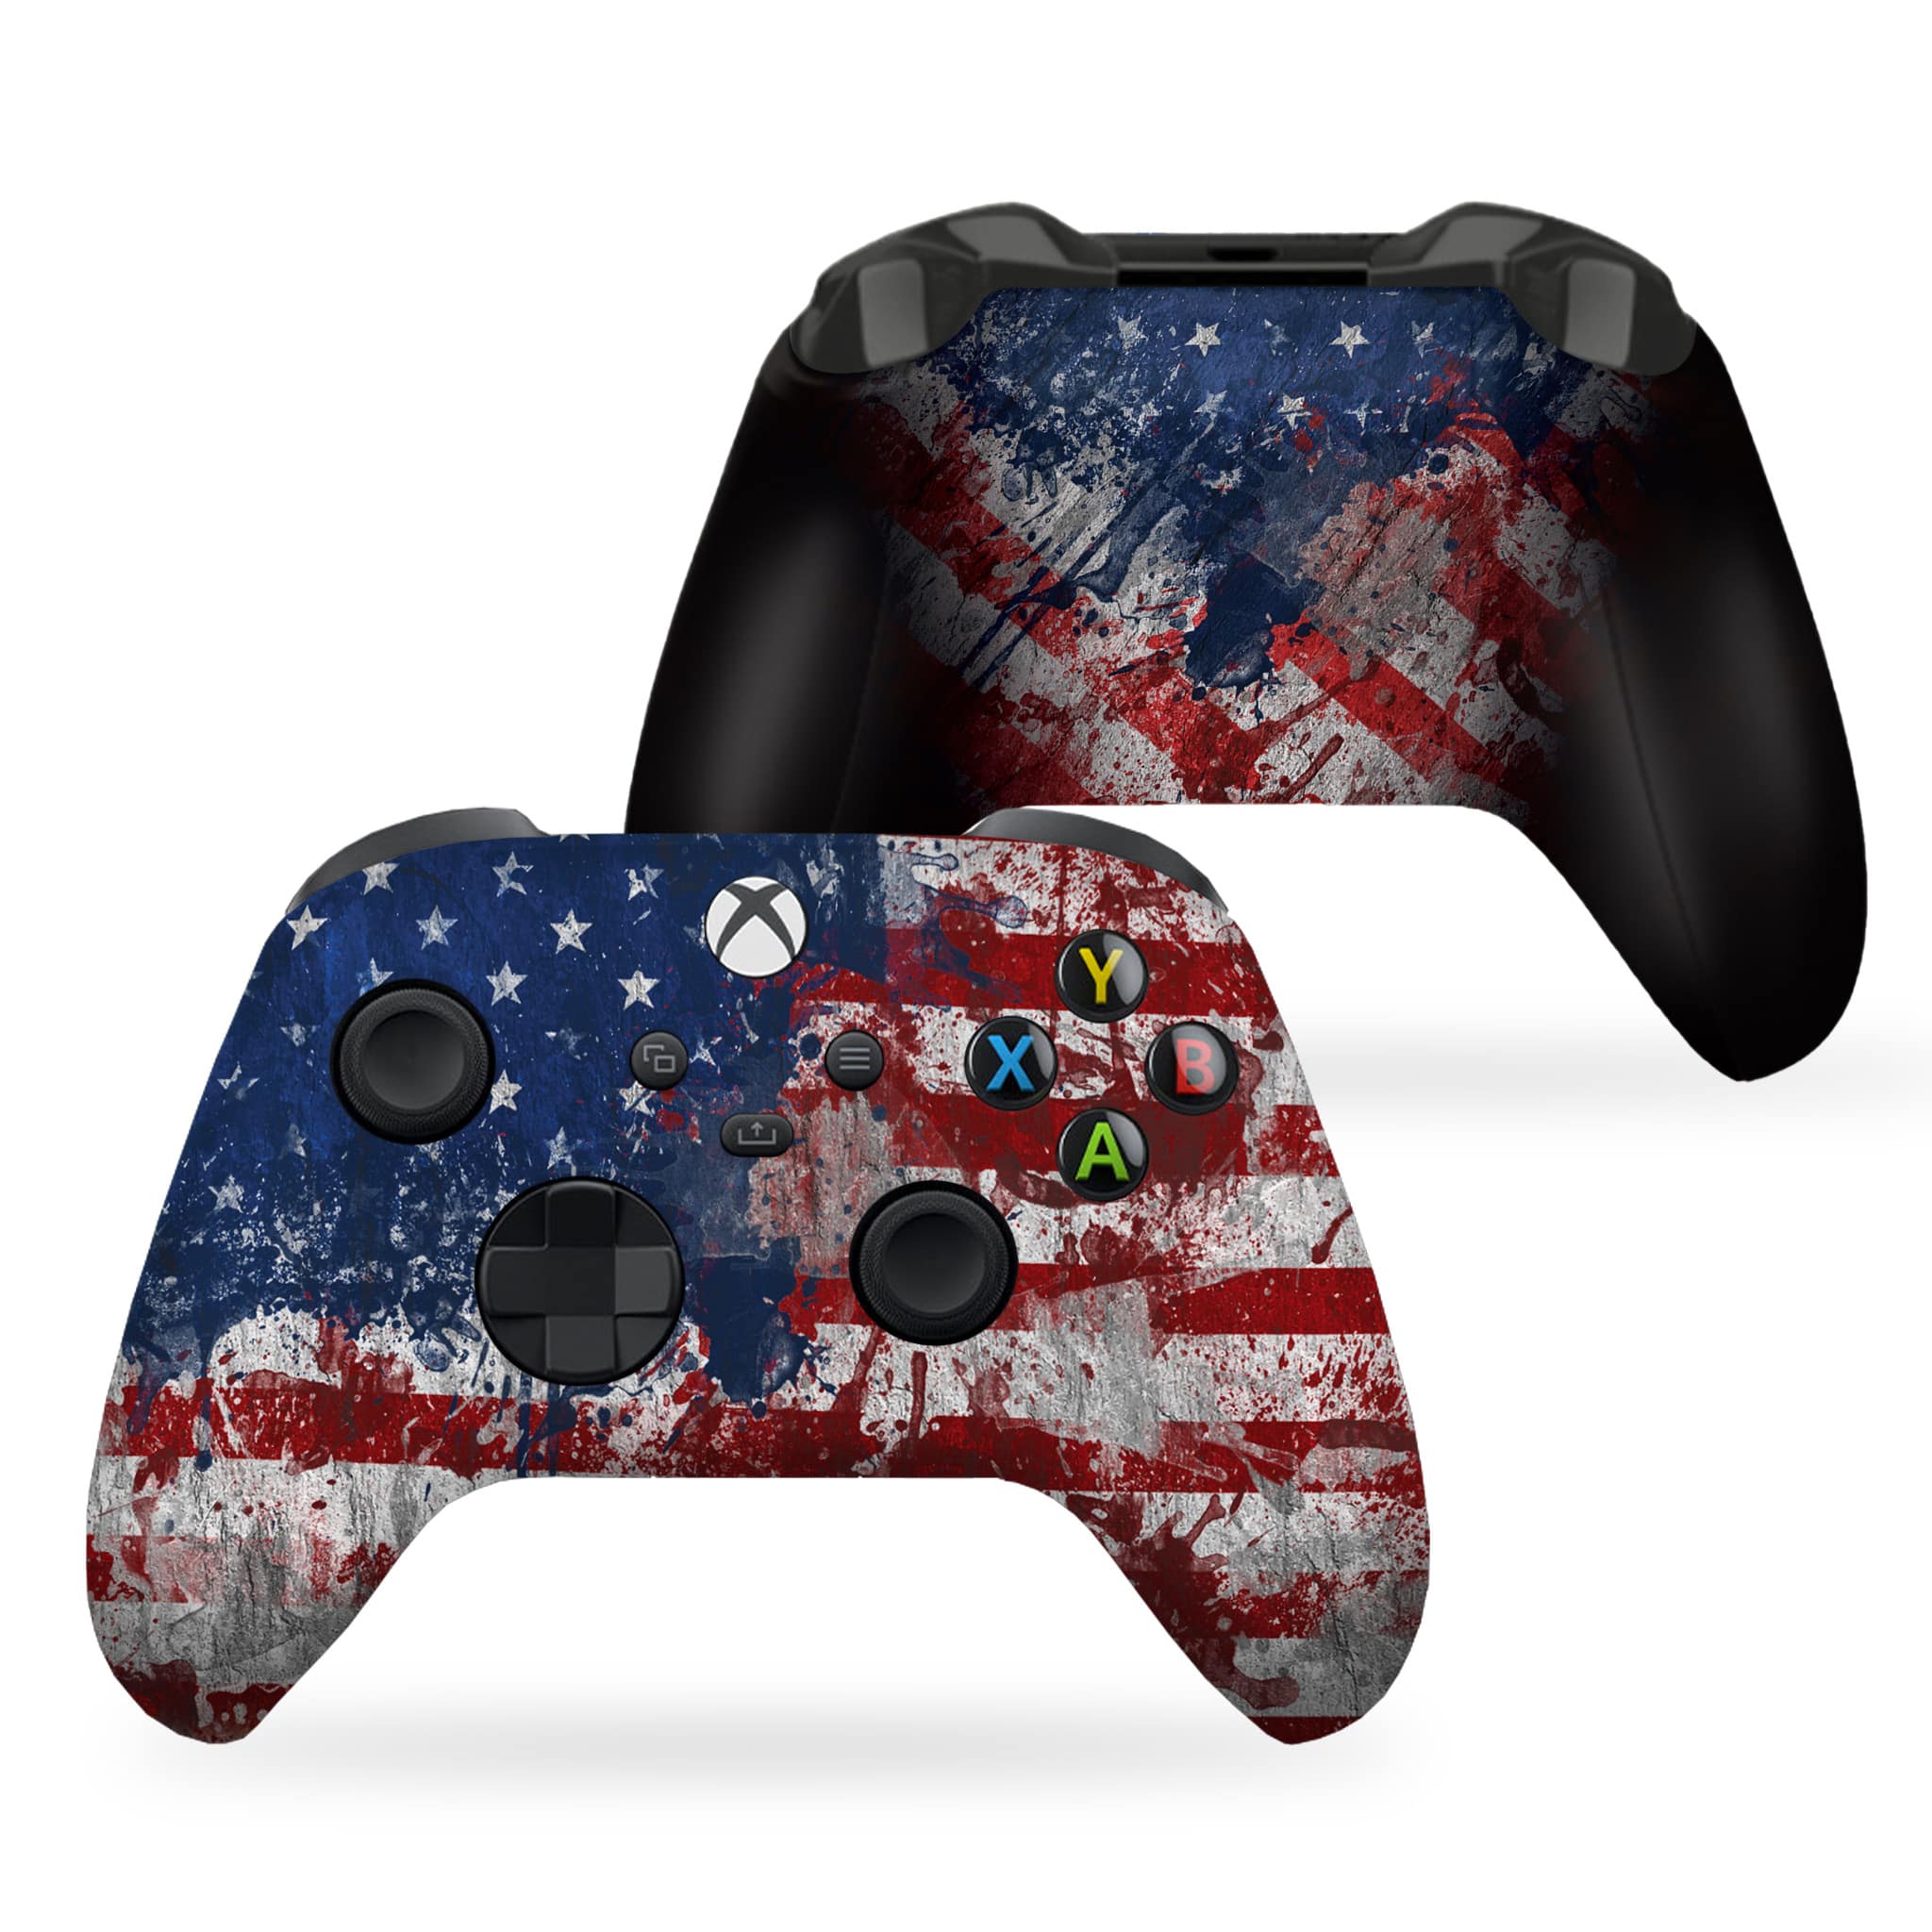 Tattered Flag Xbox Series X Controller - Dream Controller